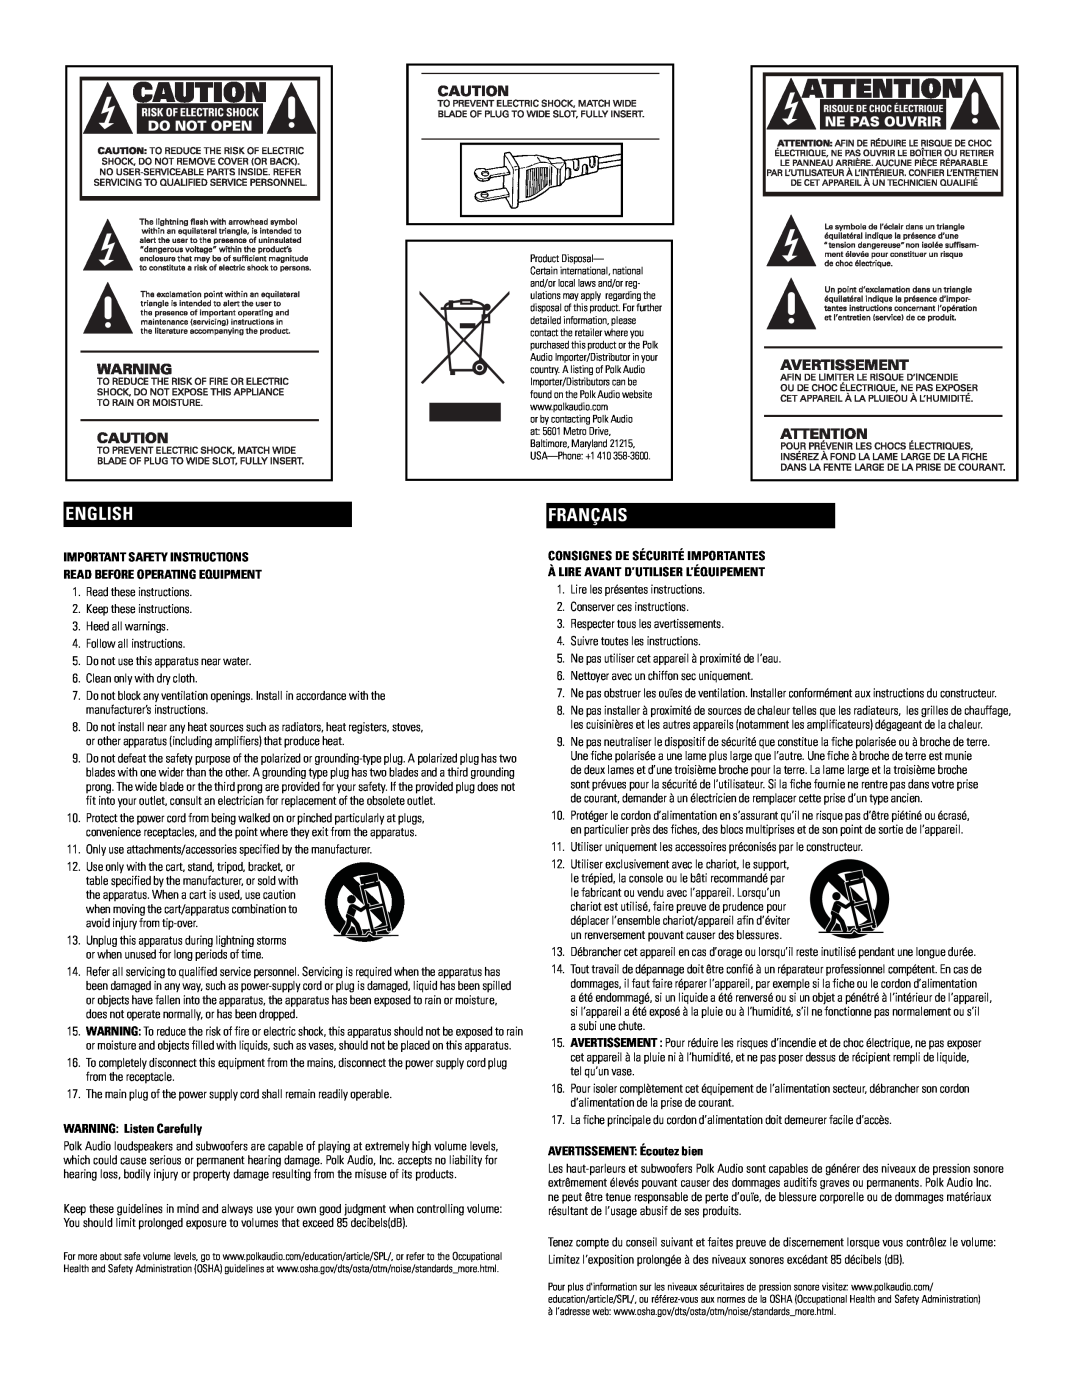 Polk Audio PSW125, PSW110 owner manual Français, English, Important Safety Instructions, Read Before Operating Equipment 